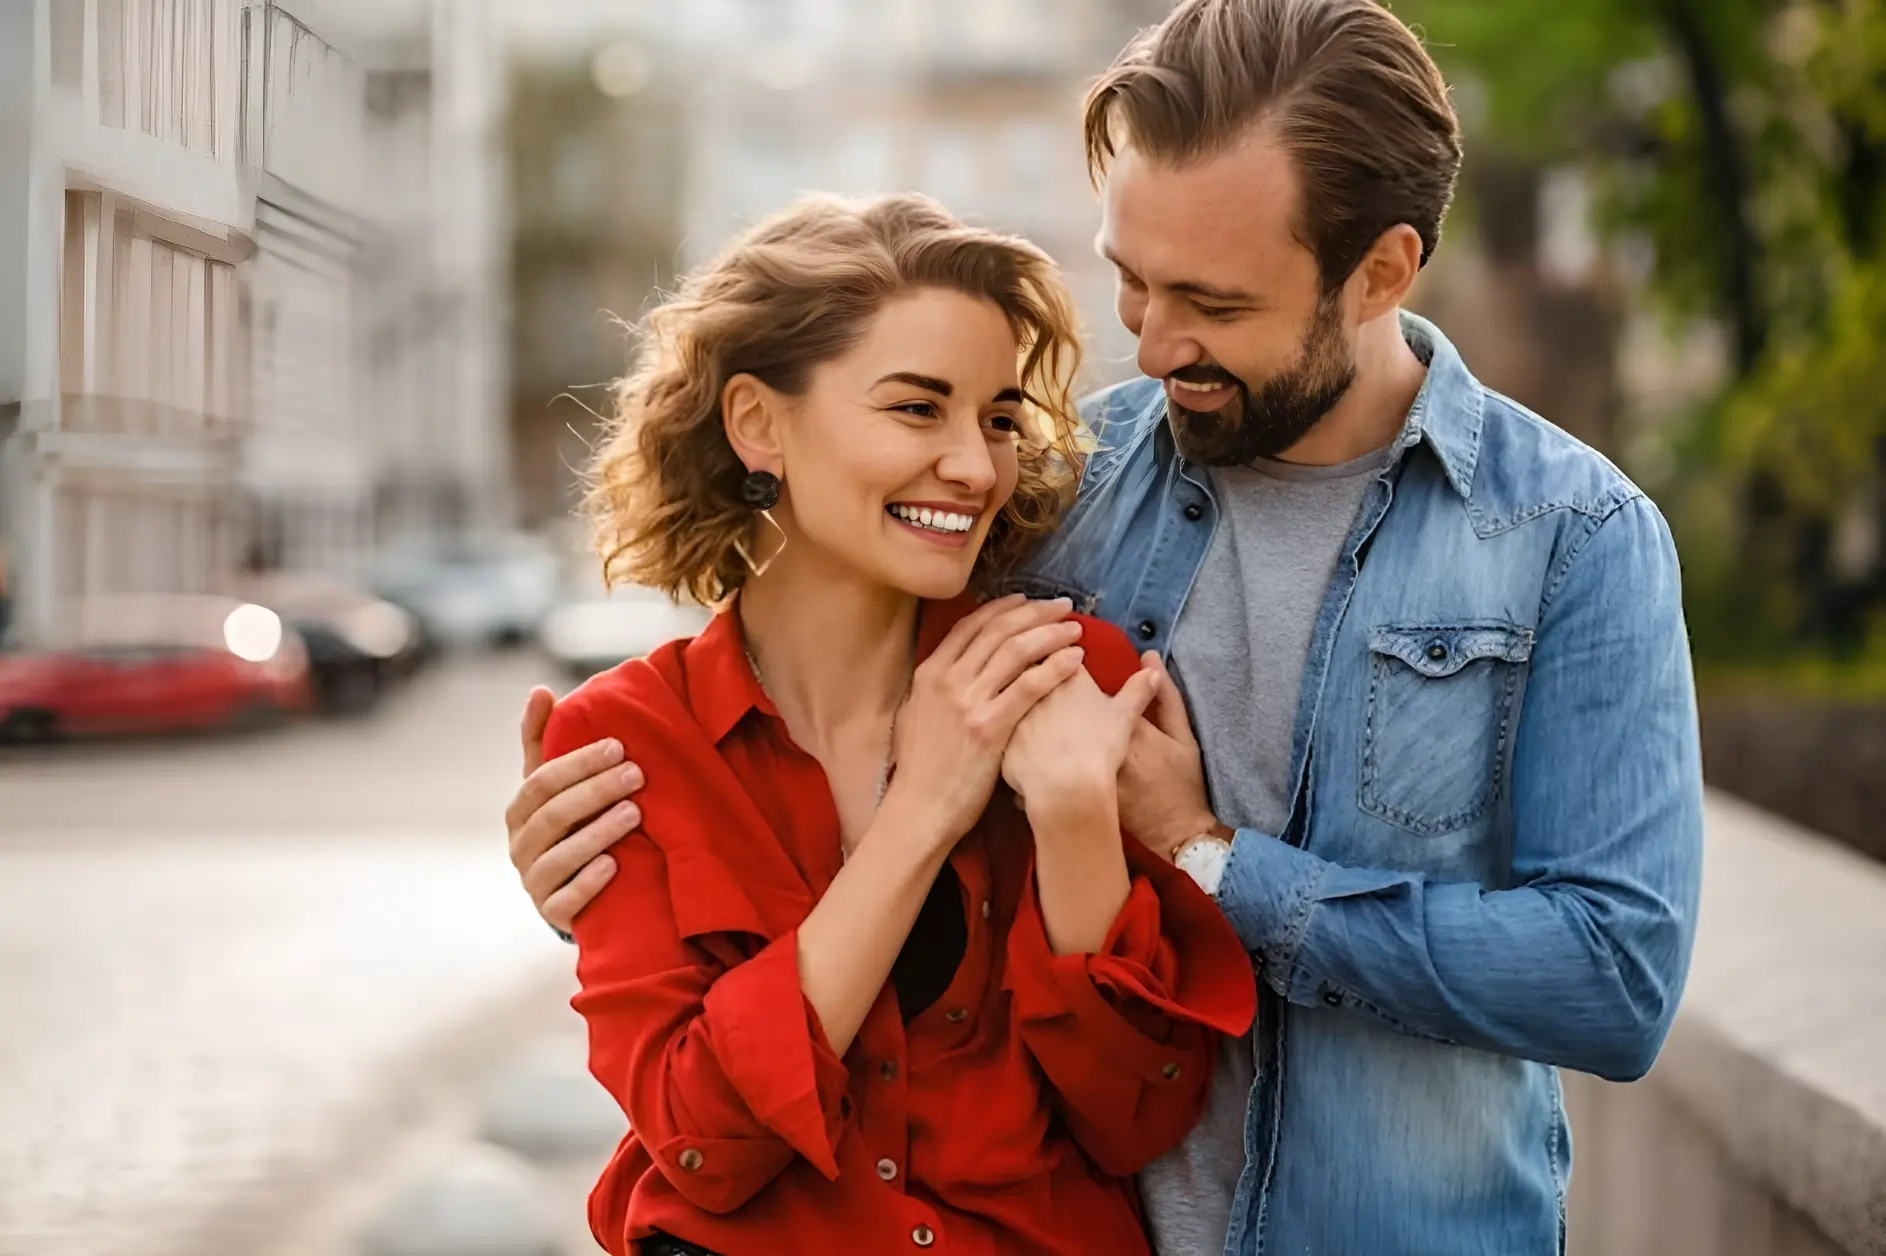 Dating Tips for Women: How to Find Mr. Right Without Compromising Your Safety